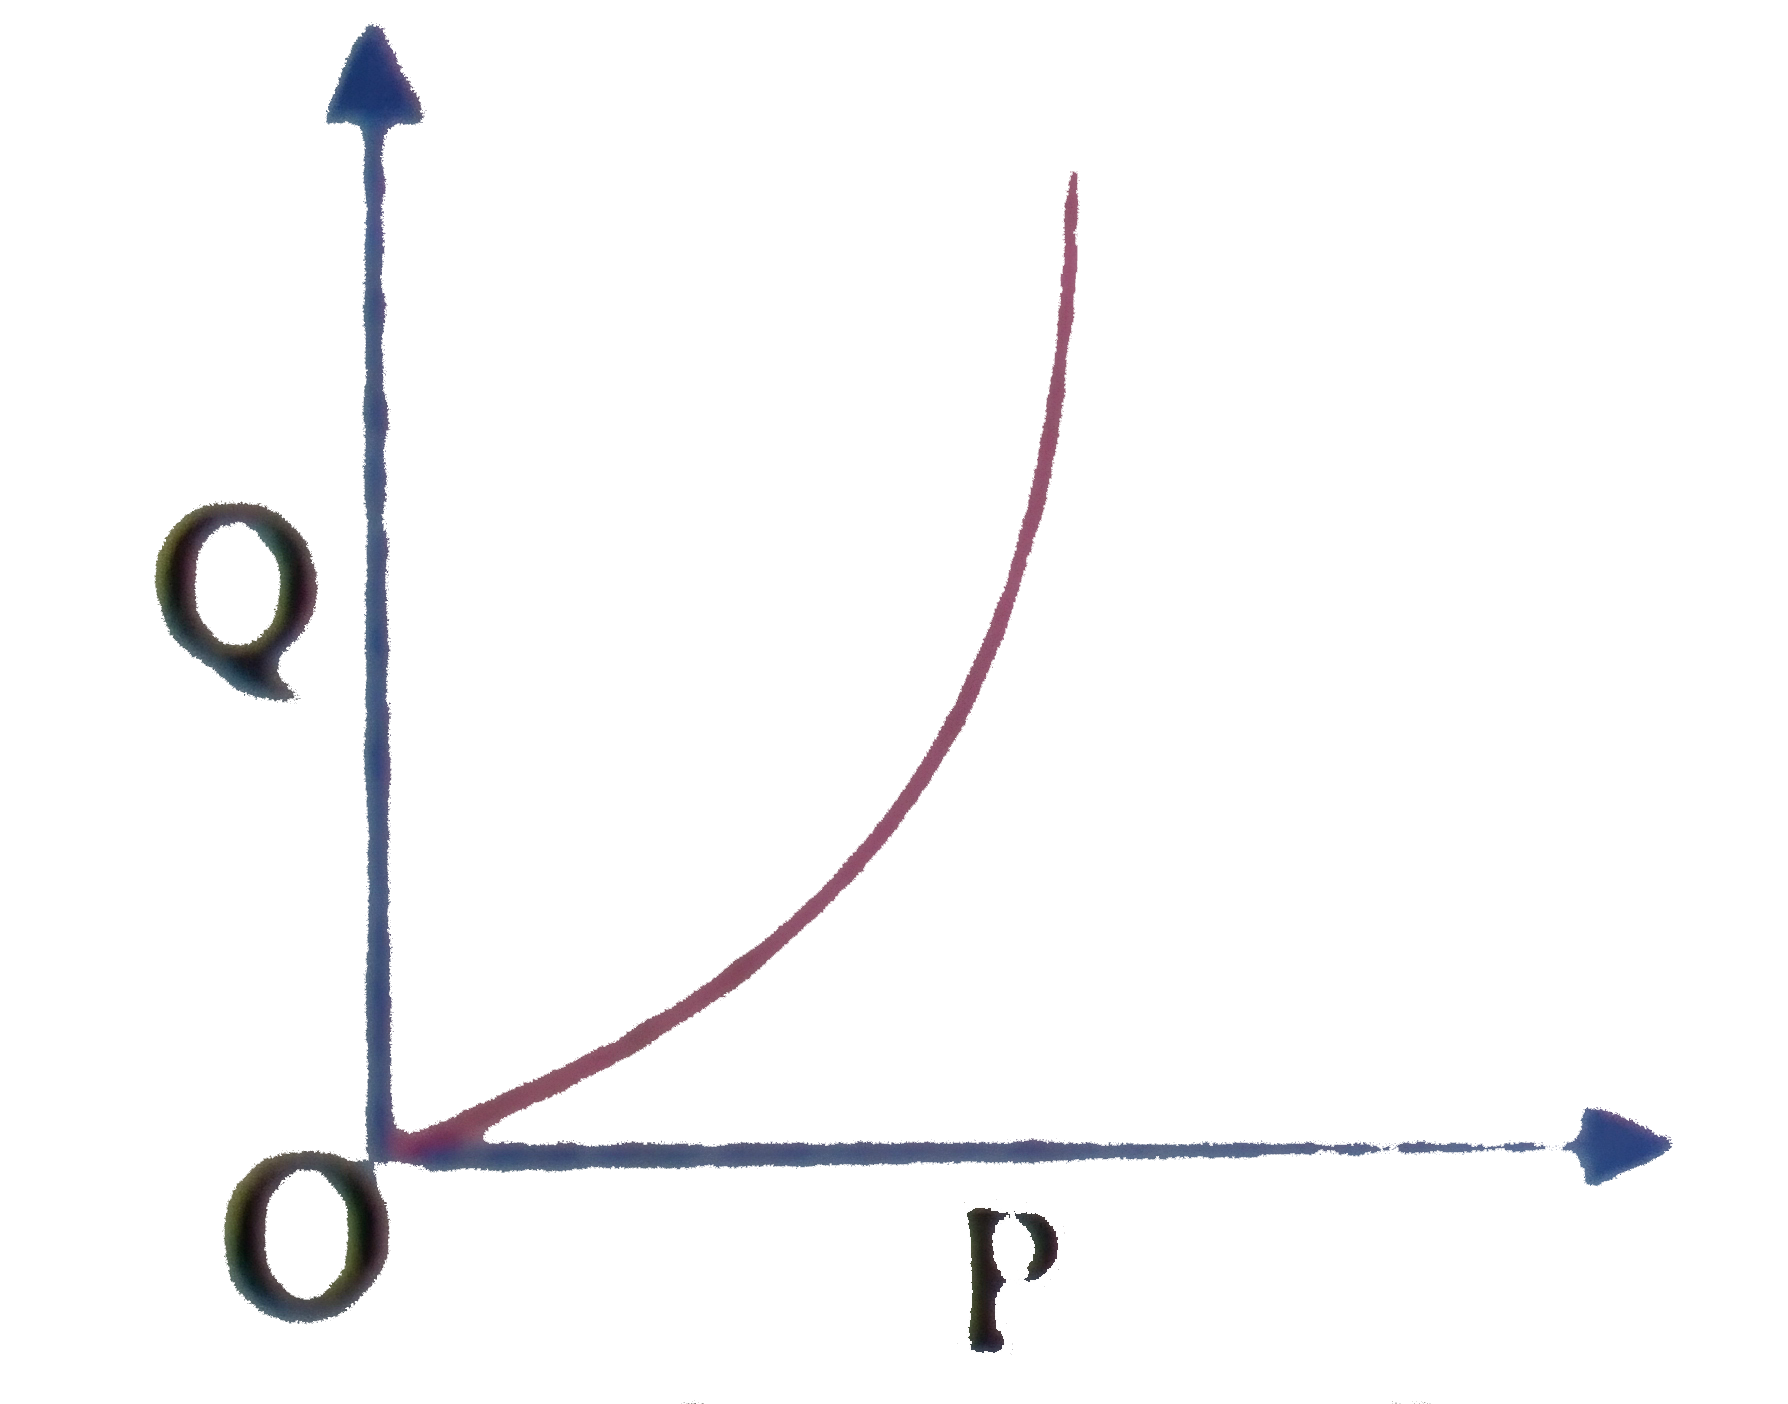 The graph show the behaviour of a length of wire in the region for which  the substances obeys Hooke's law. P and Q represent